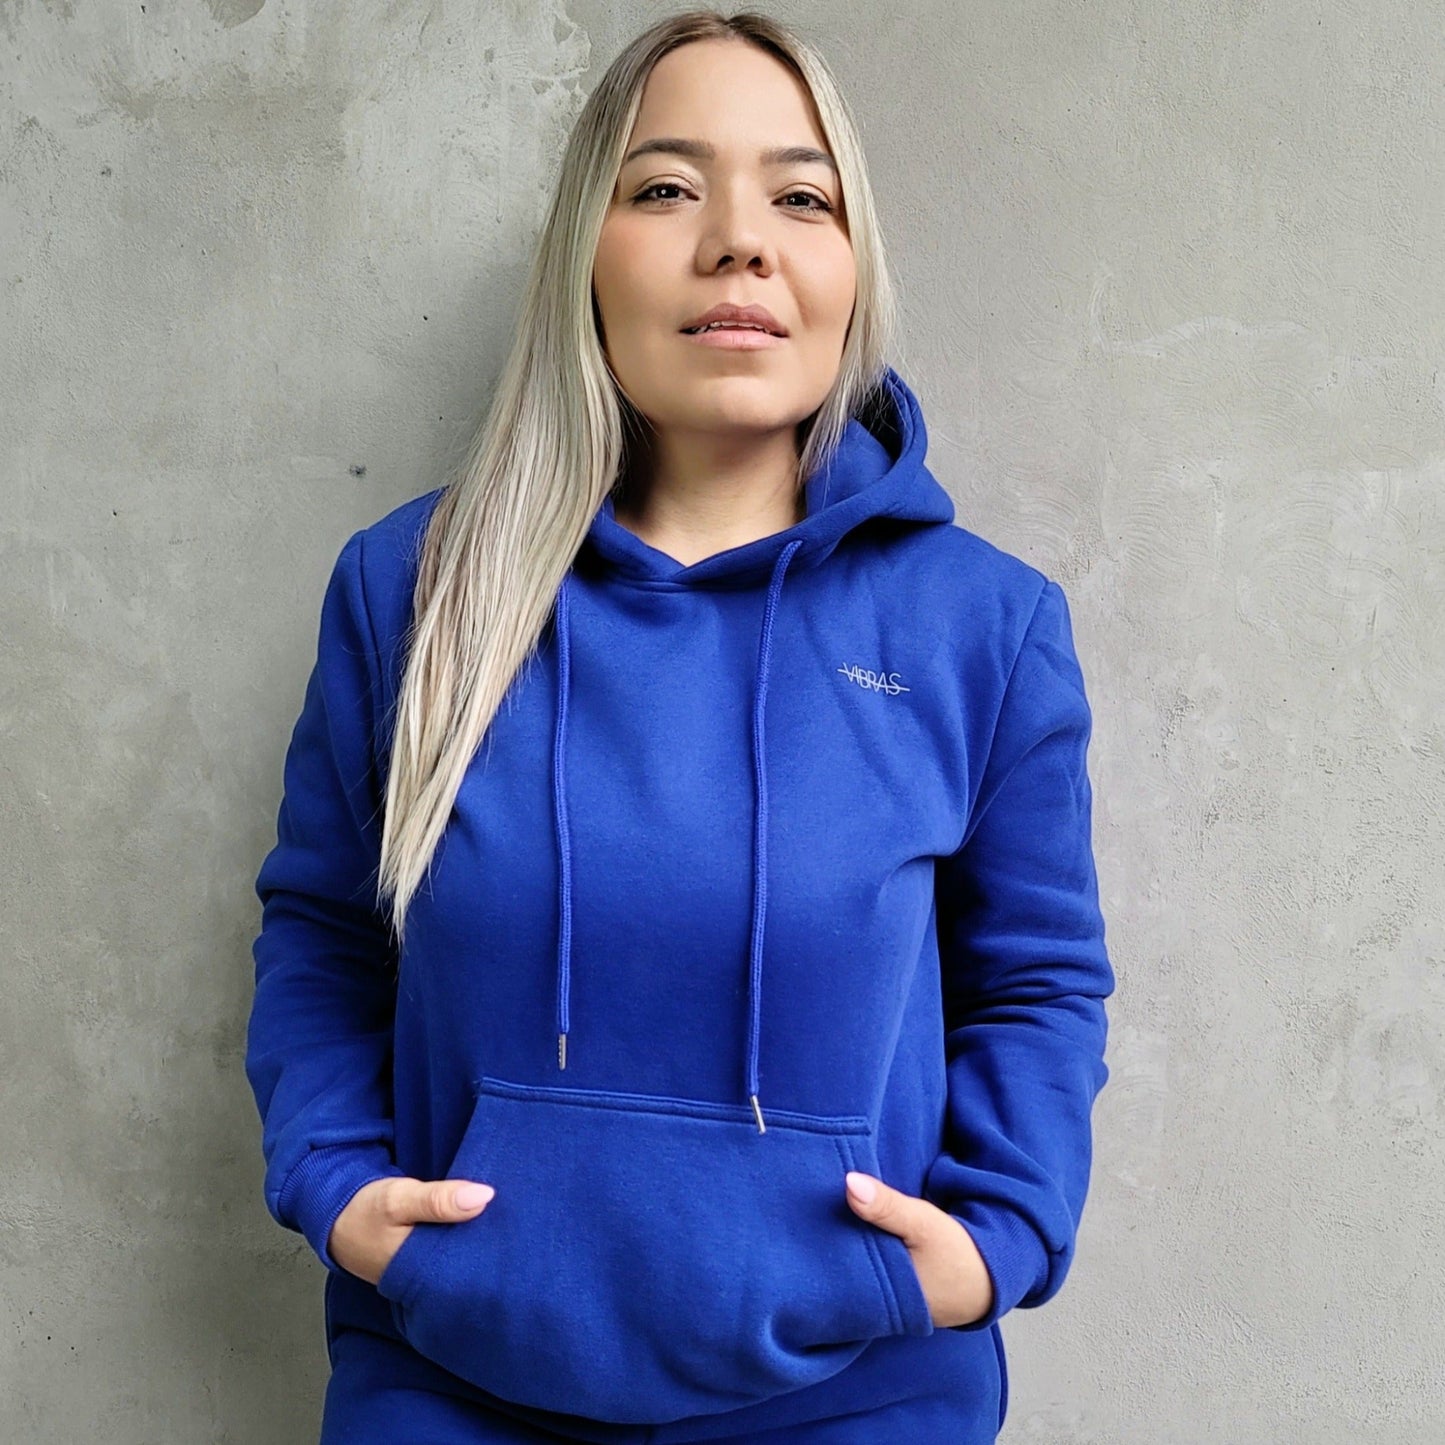 MODEL WEARING A COBALT MATCHING TRACKSUIT  FROM VIBRAS ACTIVE WEAR.